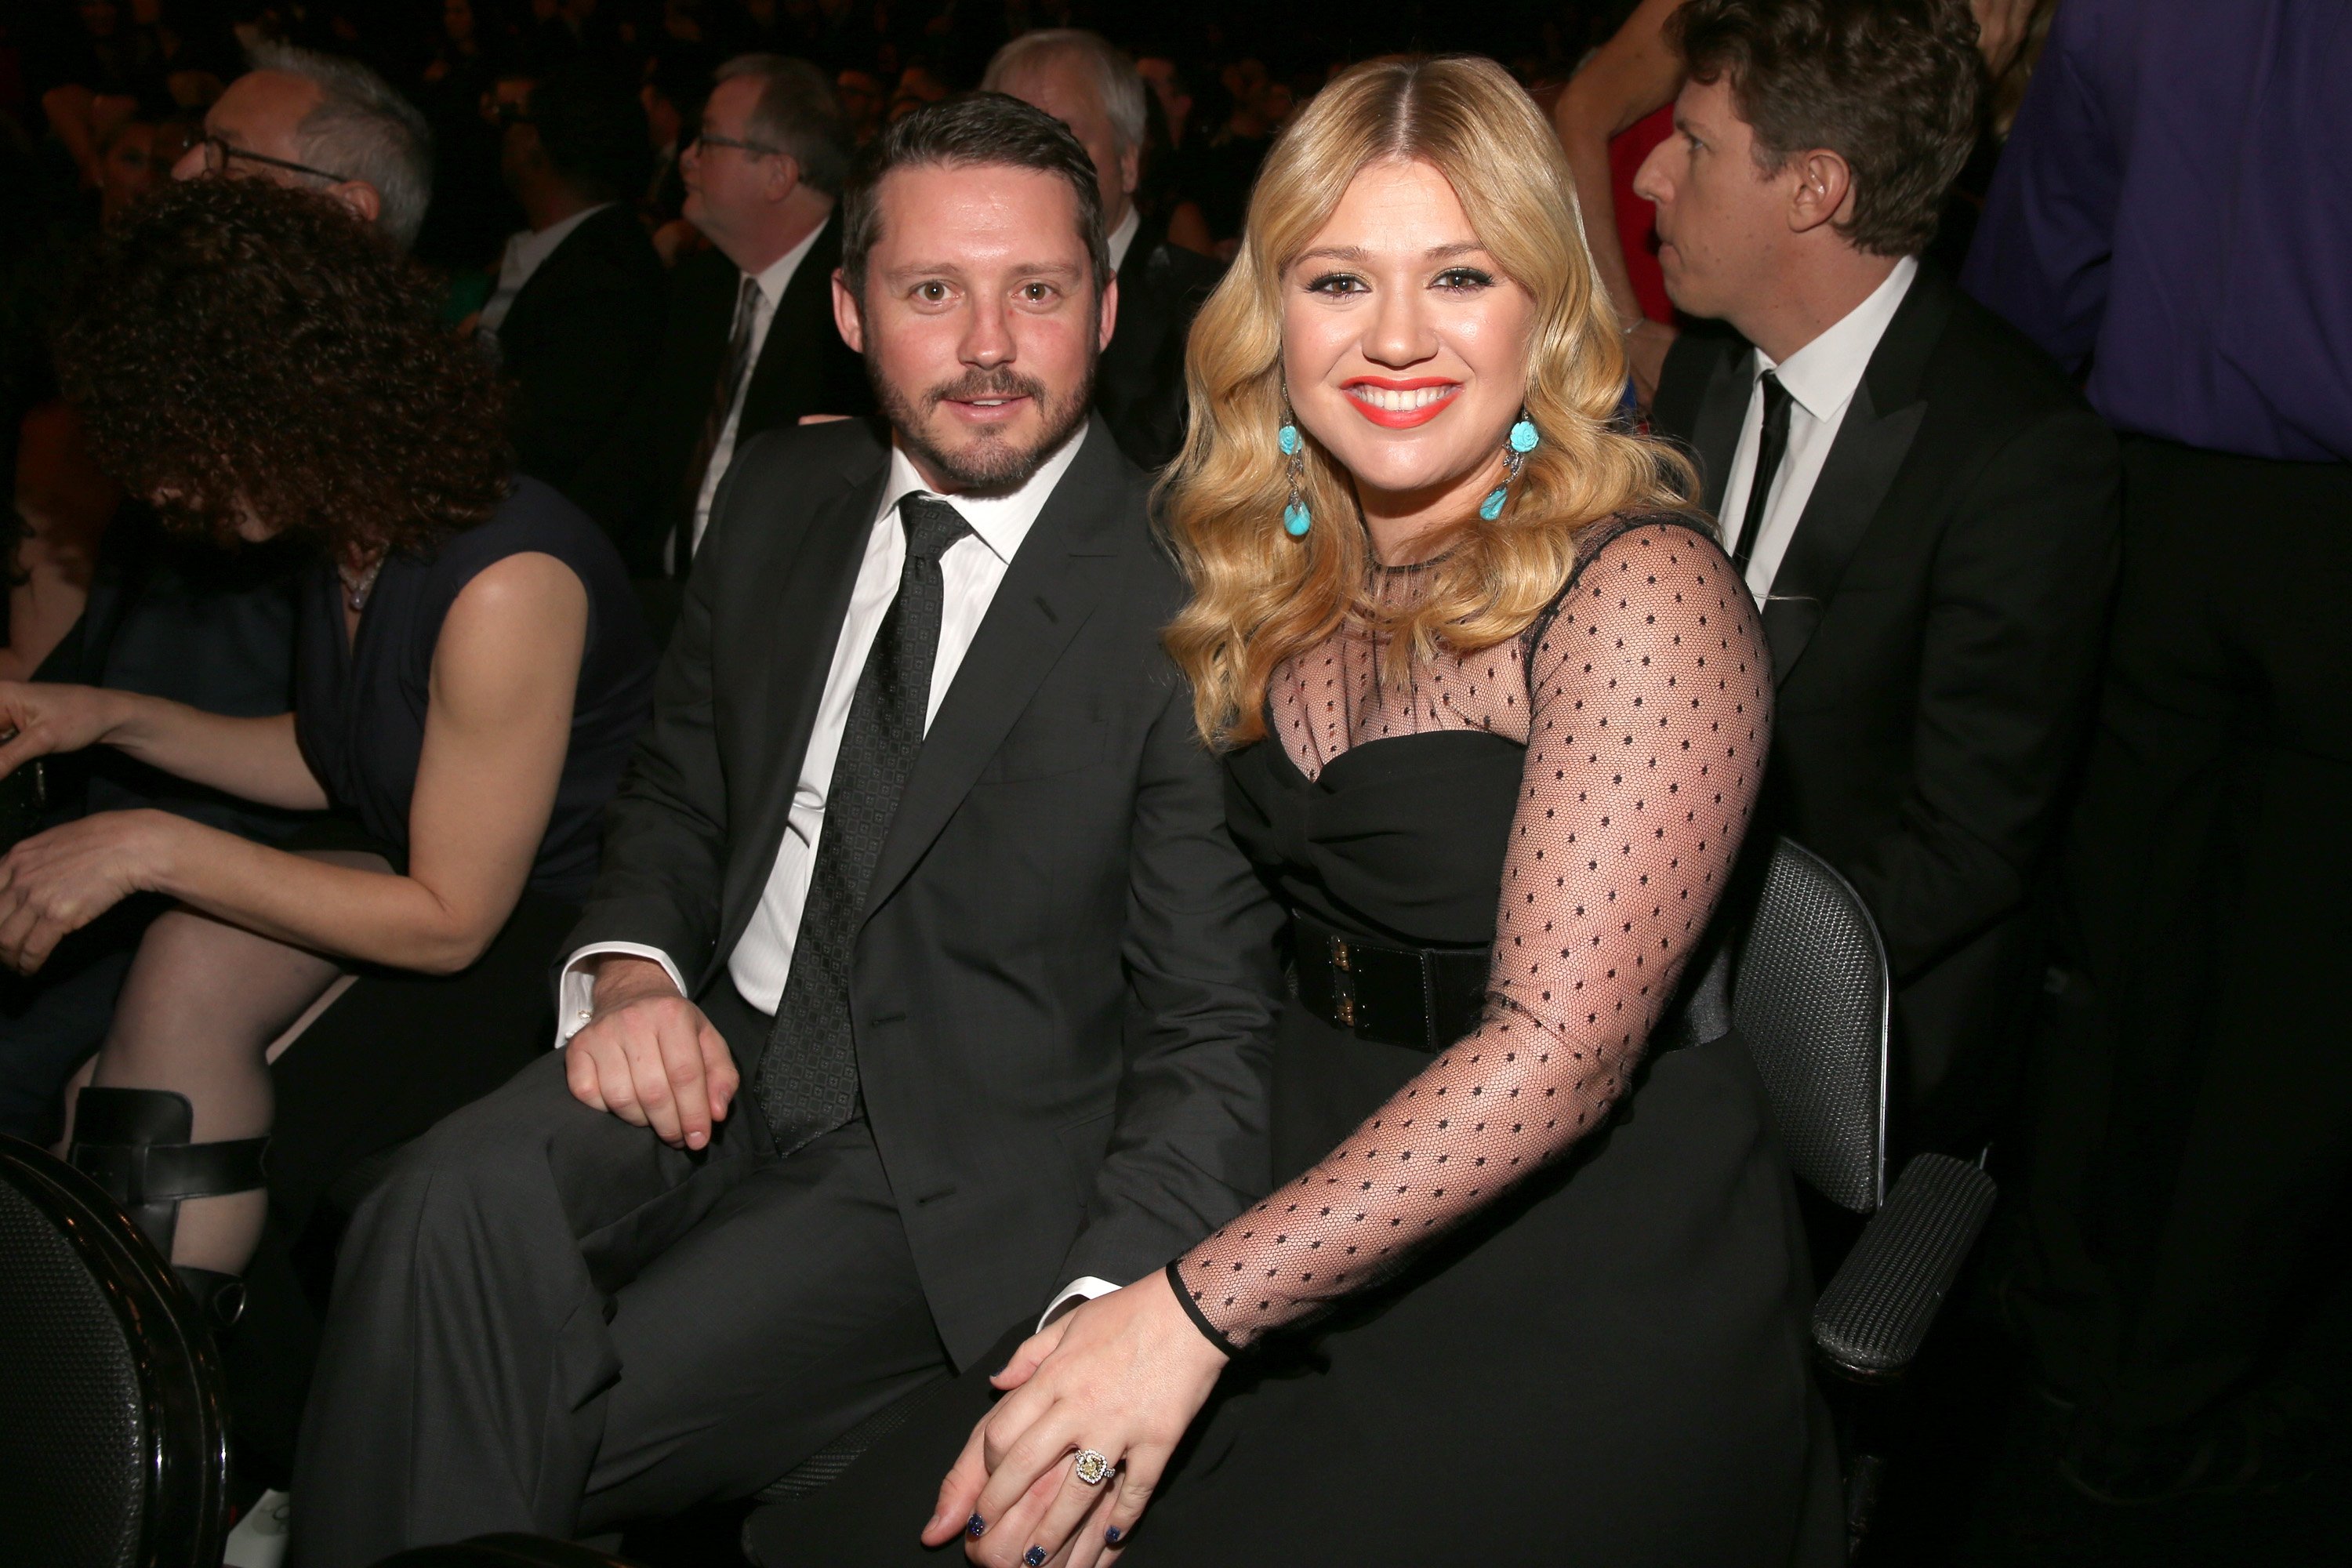 Kelly Clarkson and Brandon Blackstock attending the 55th Annual Grammy Awards at Staples Center on February 10, 2013 in Los Angeles, California. | Source: Getty Images